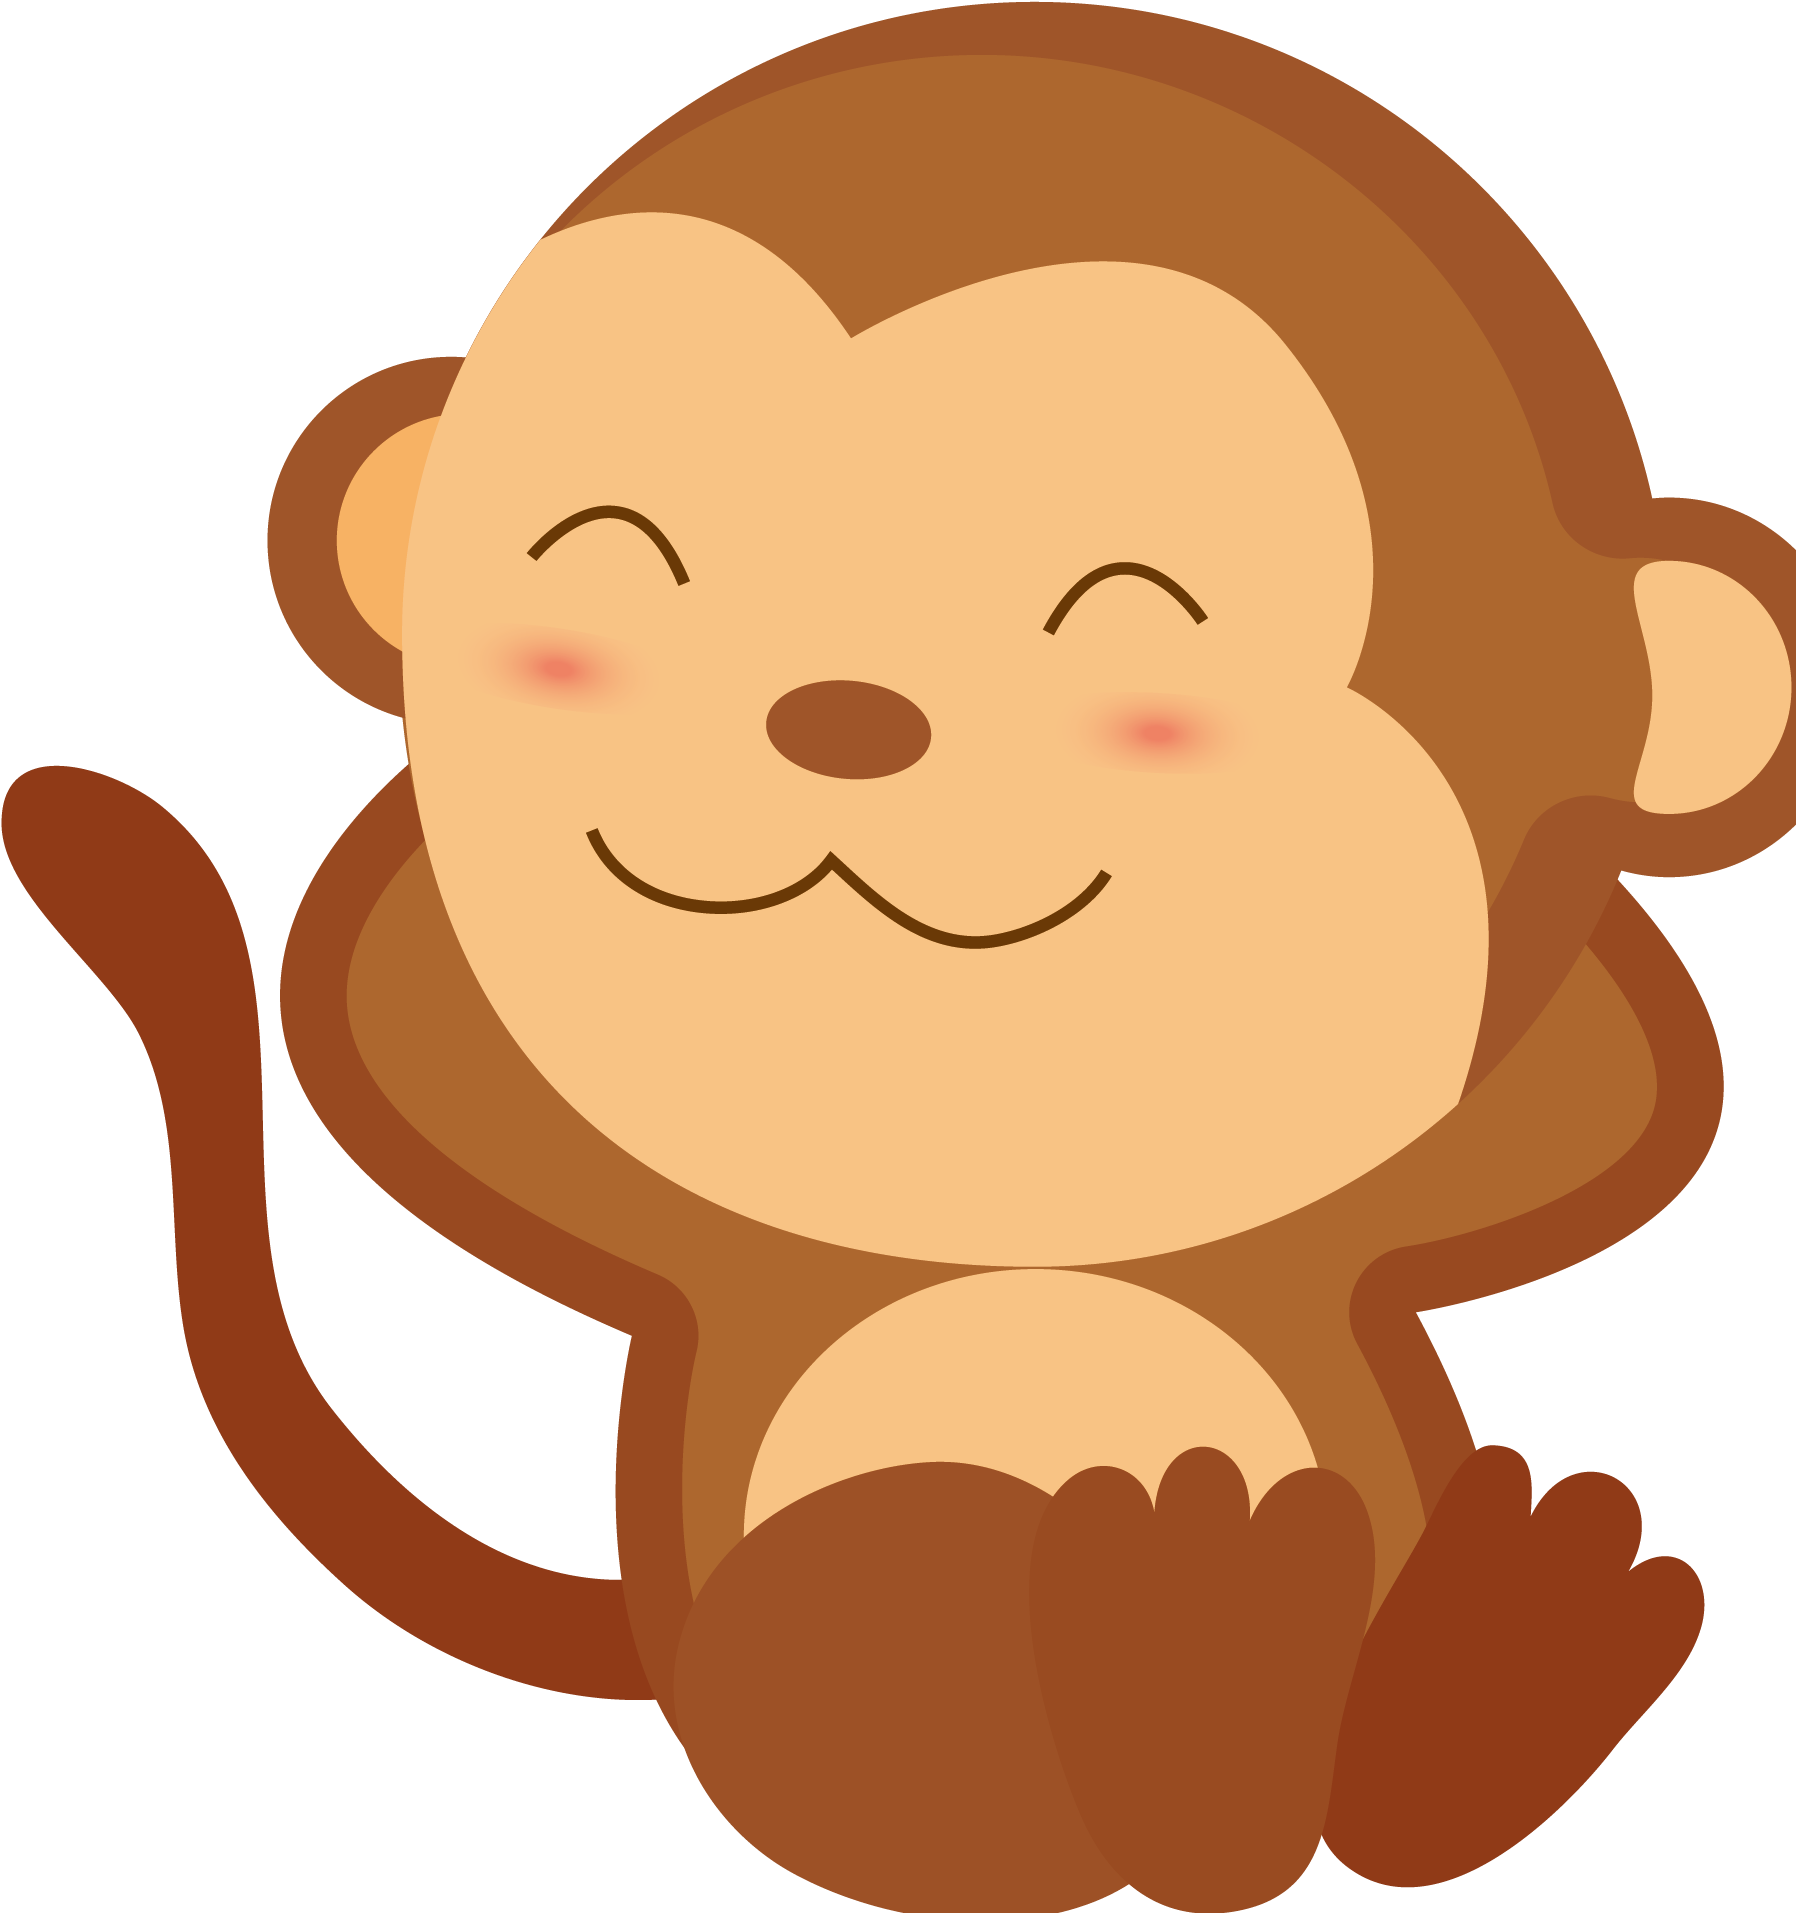 Monkey Scalable Vector Graphics Clip Art - Monkey Scalable Vector Graphics Clip Art (1851x1919)